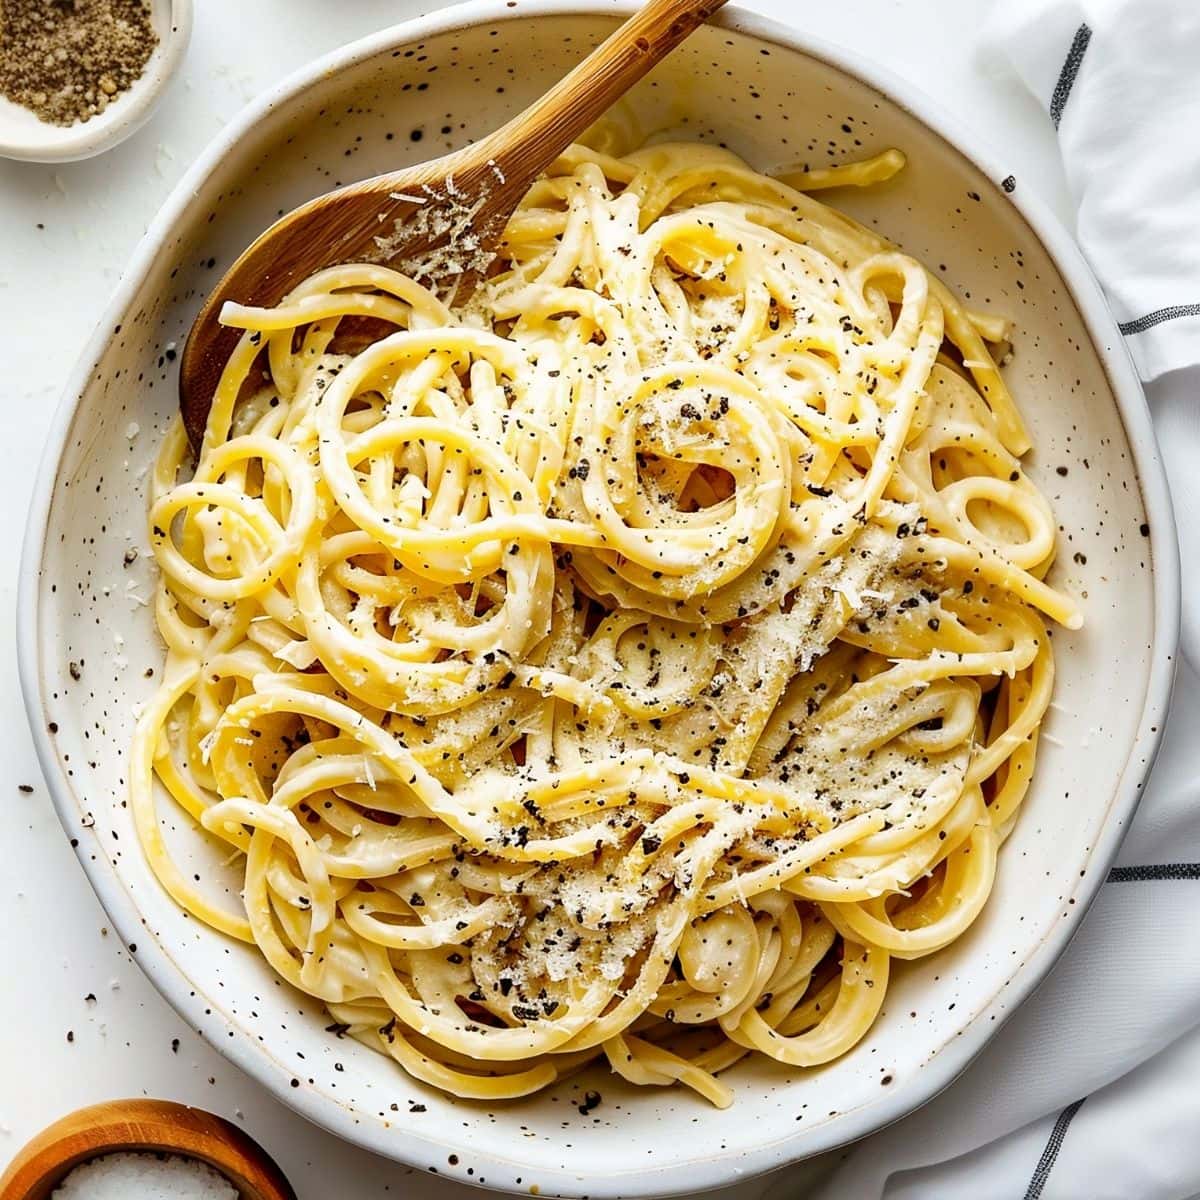 Top View of Cacio e Pepe in a Serving Dish with a Wooden Spoon